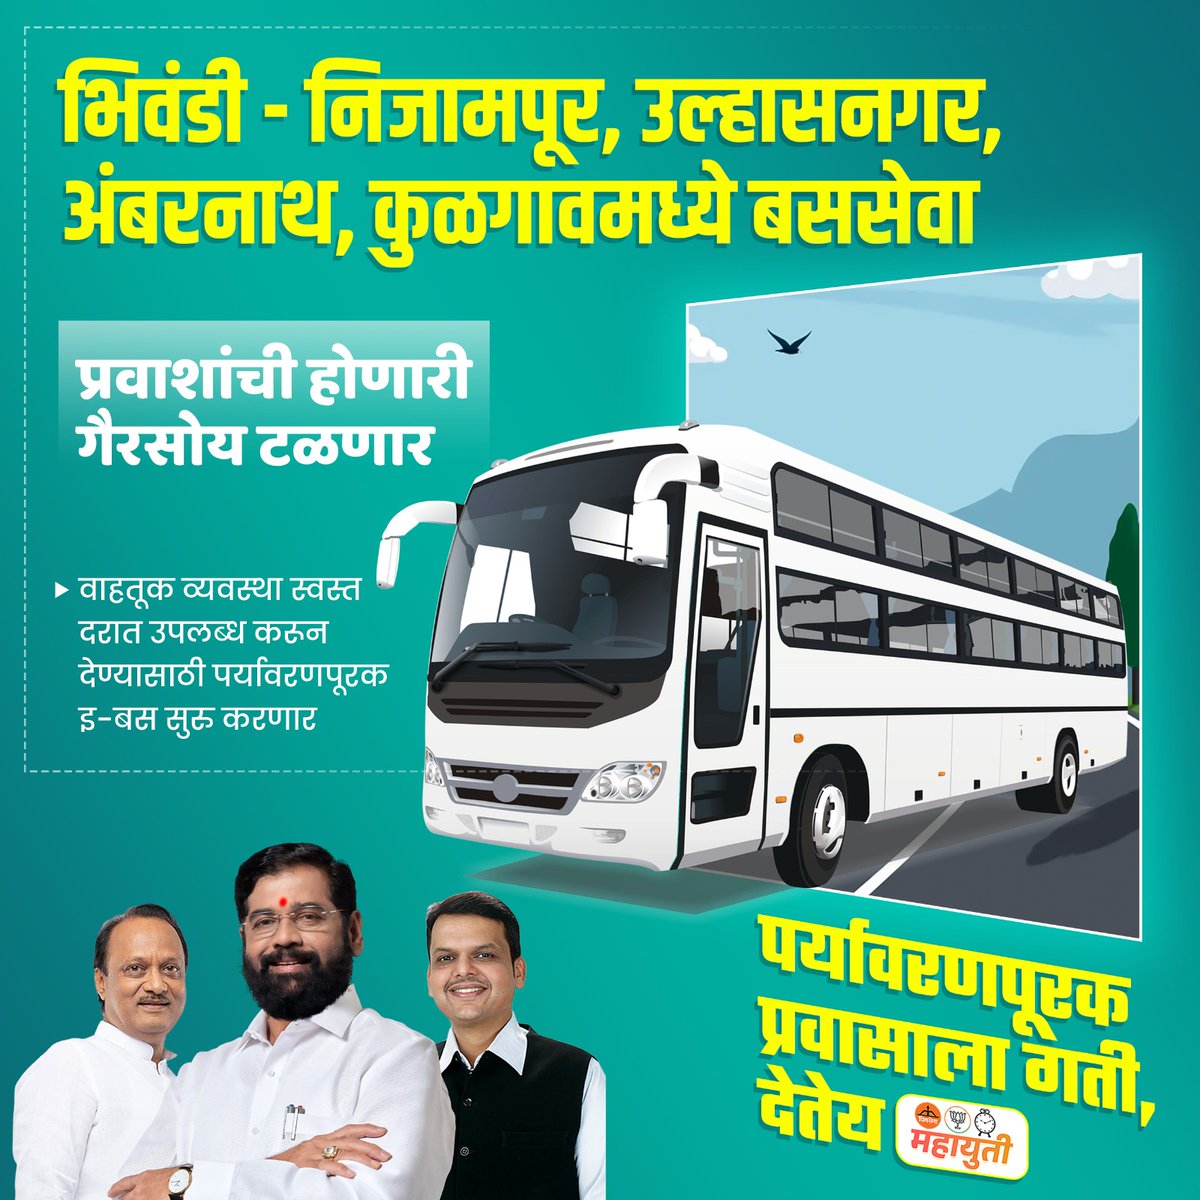 Kudos to CM Eknath Shinde's government for prioritizing commuter comfort and environmental sustainability! The launch of environment-friendly e-buses in Bhiwandi-Nizampur, Ulhasnagar, Ambernath, and Kulgaon will provide affordable and eco-conscious transportation options.